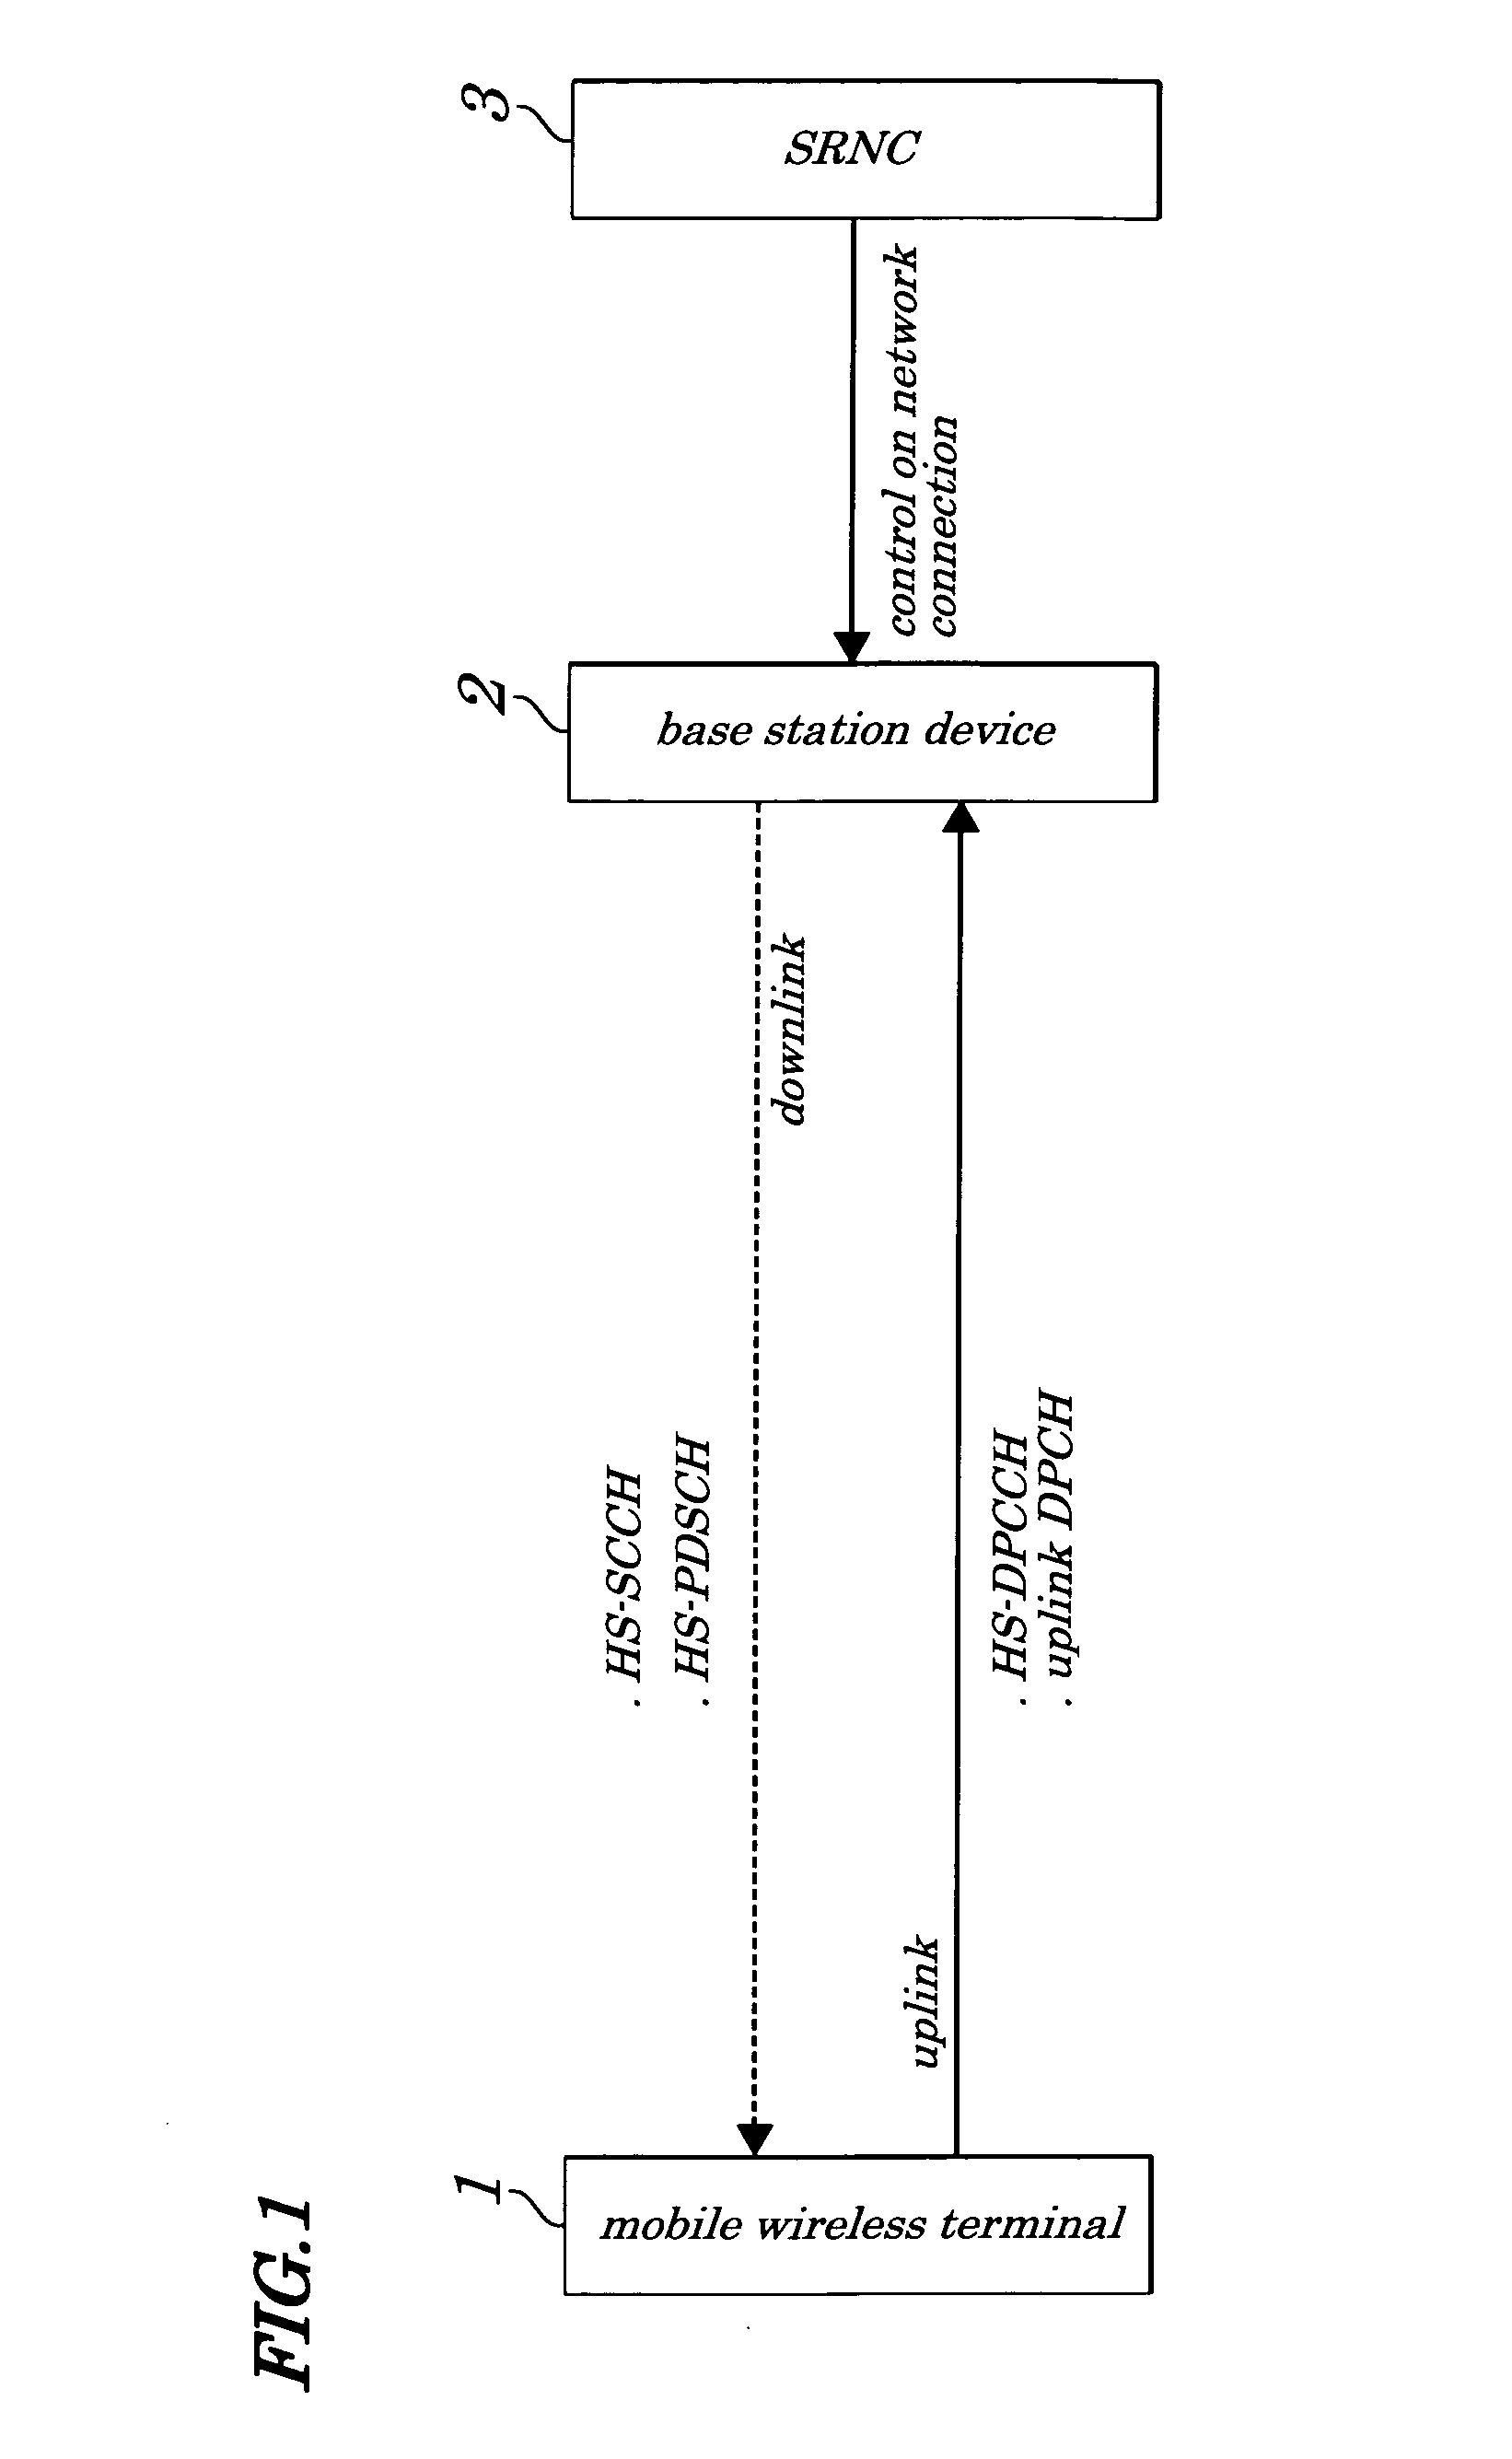 Mobile communication system, and base station device and mobile wireless terminal used in same system